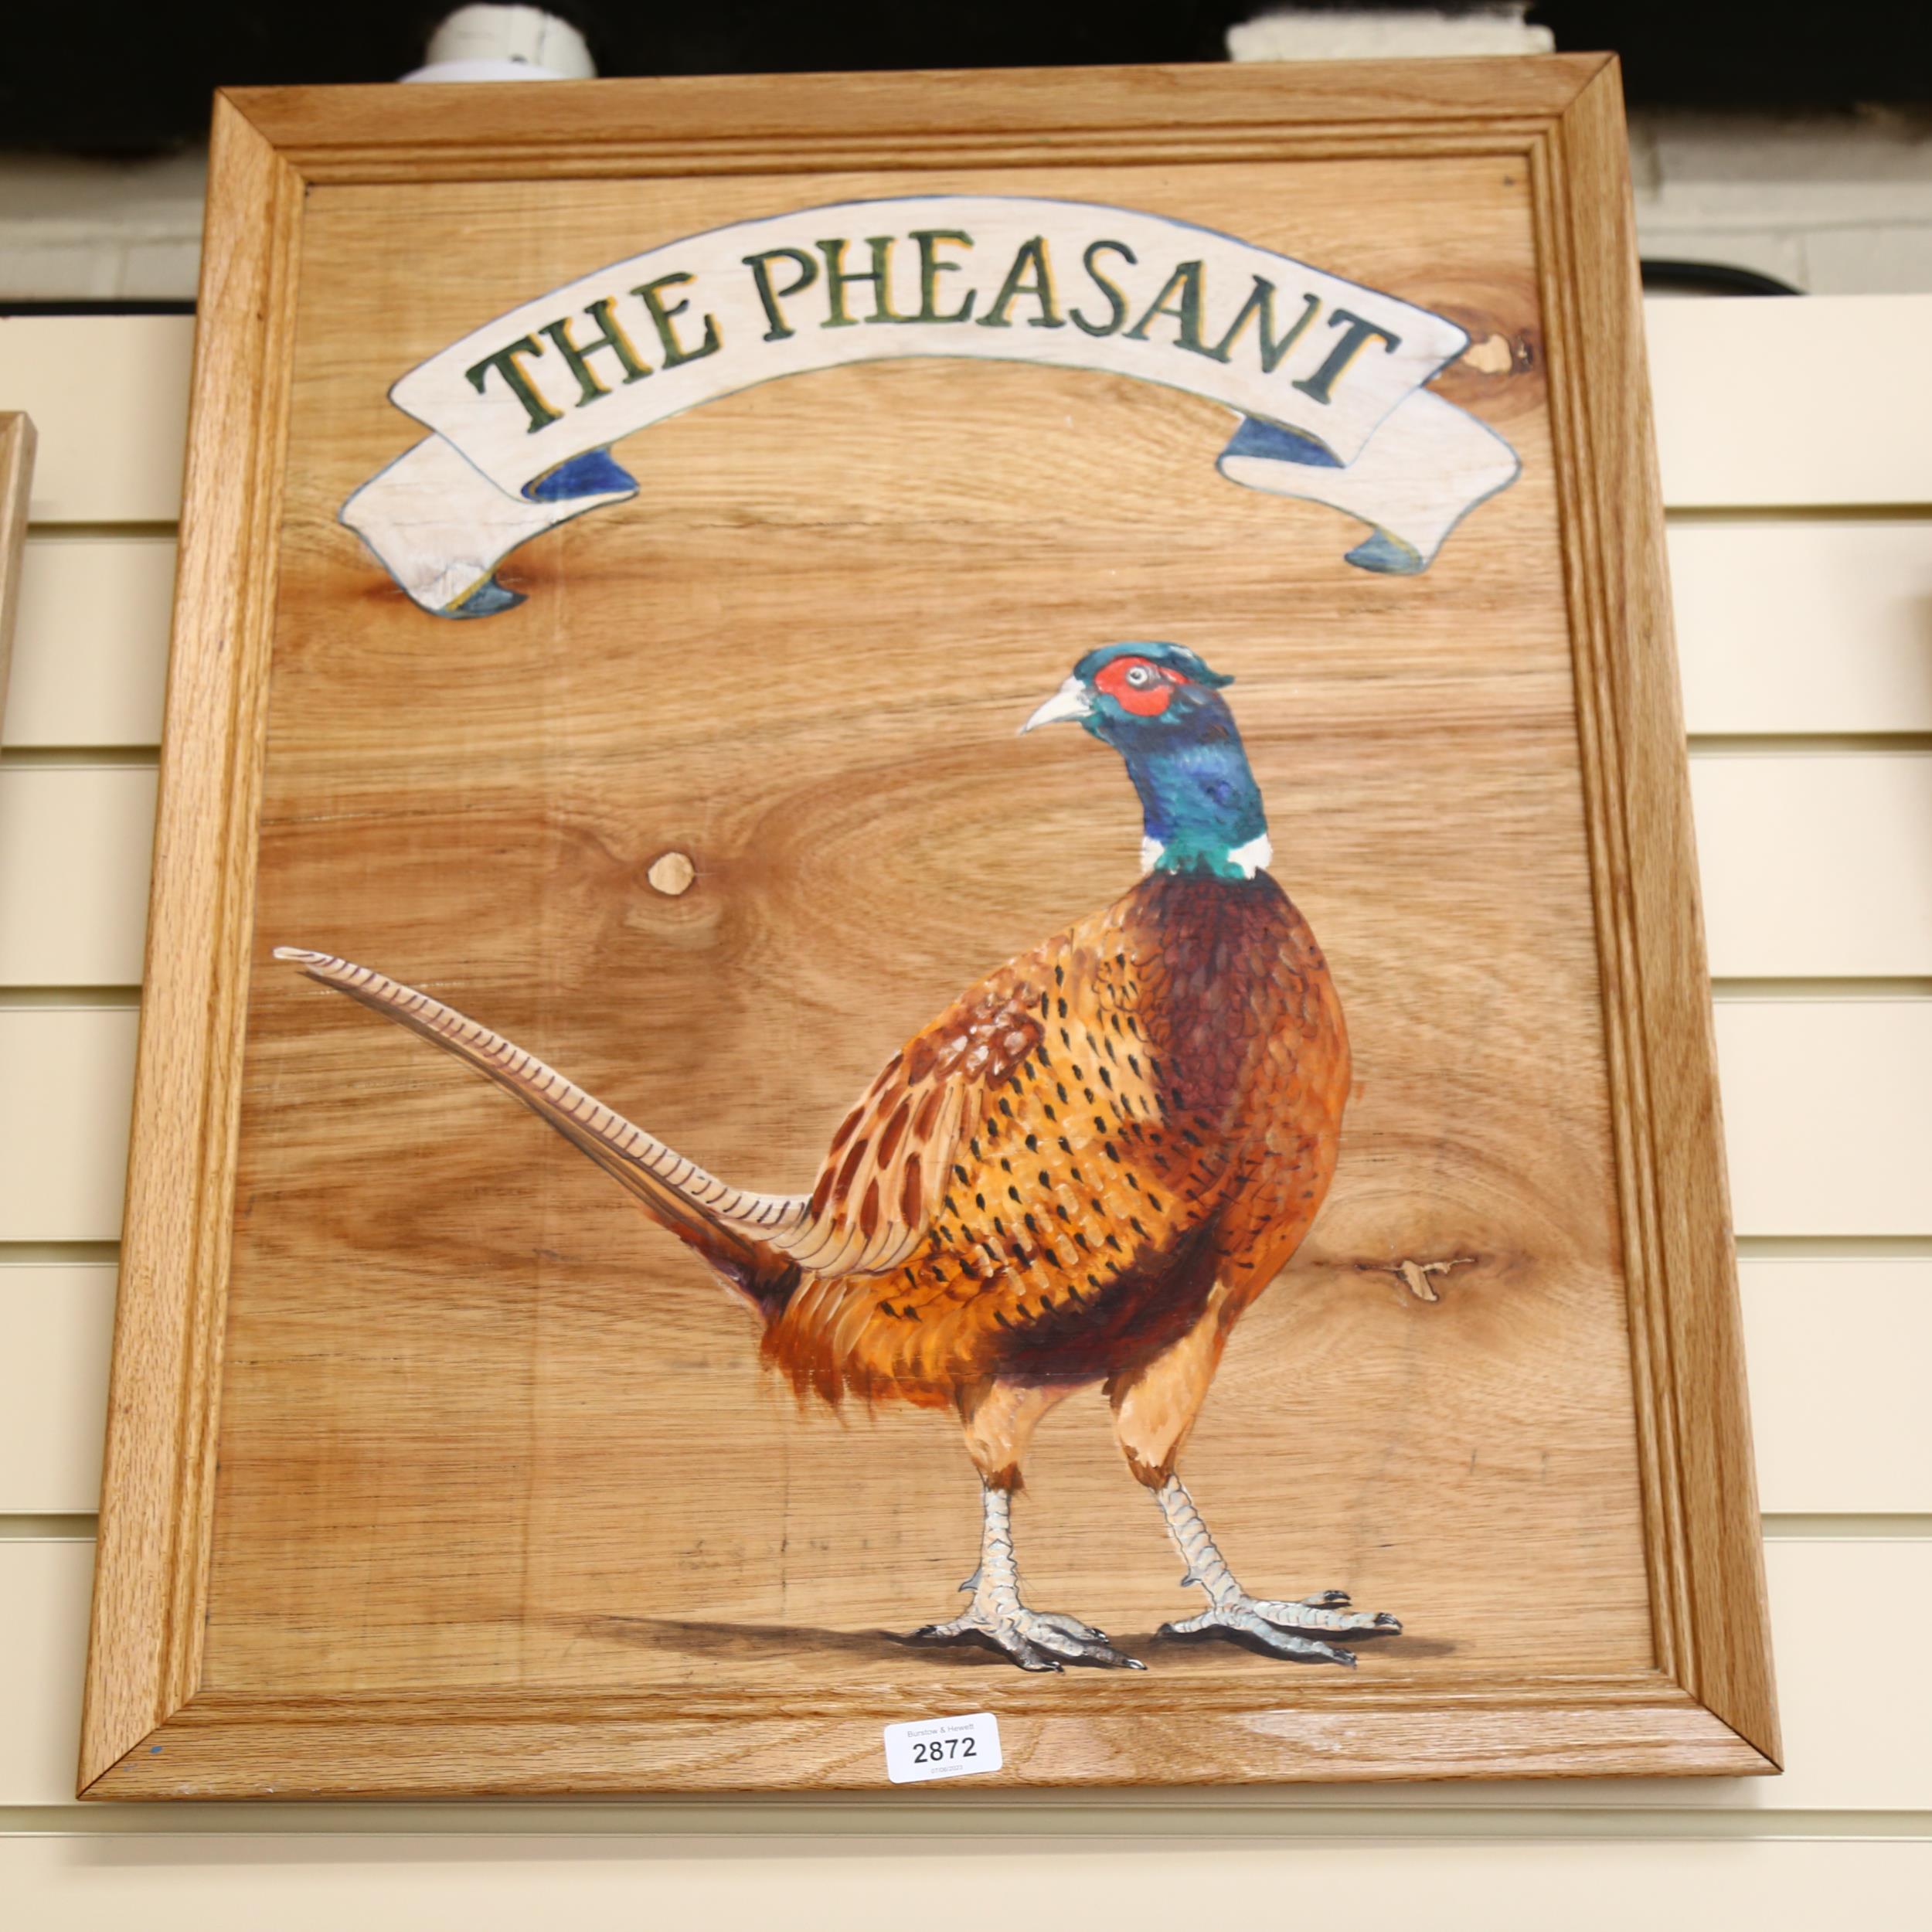 Clive Fredriksson, oil on board, "the pheasant", 67cm x 57cm, framed